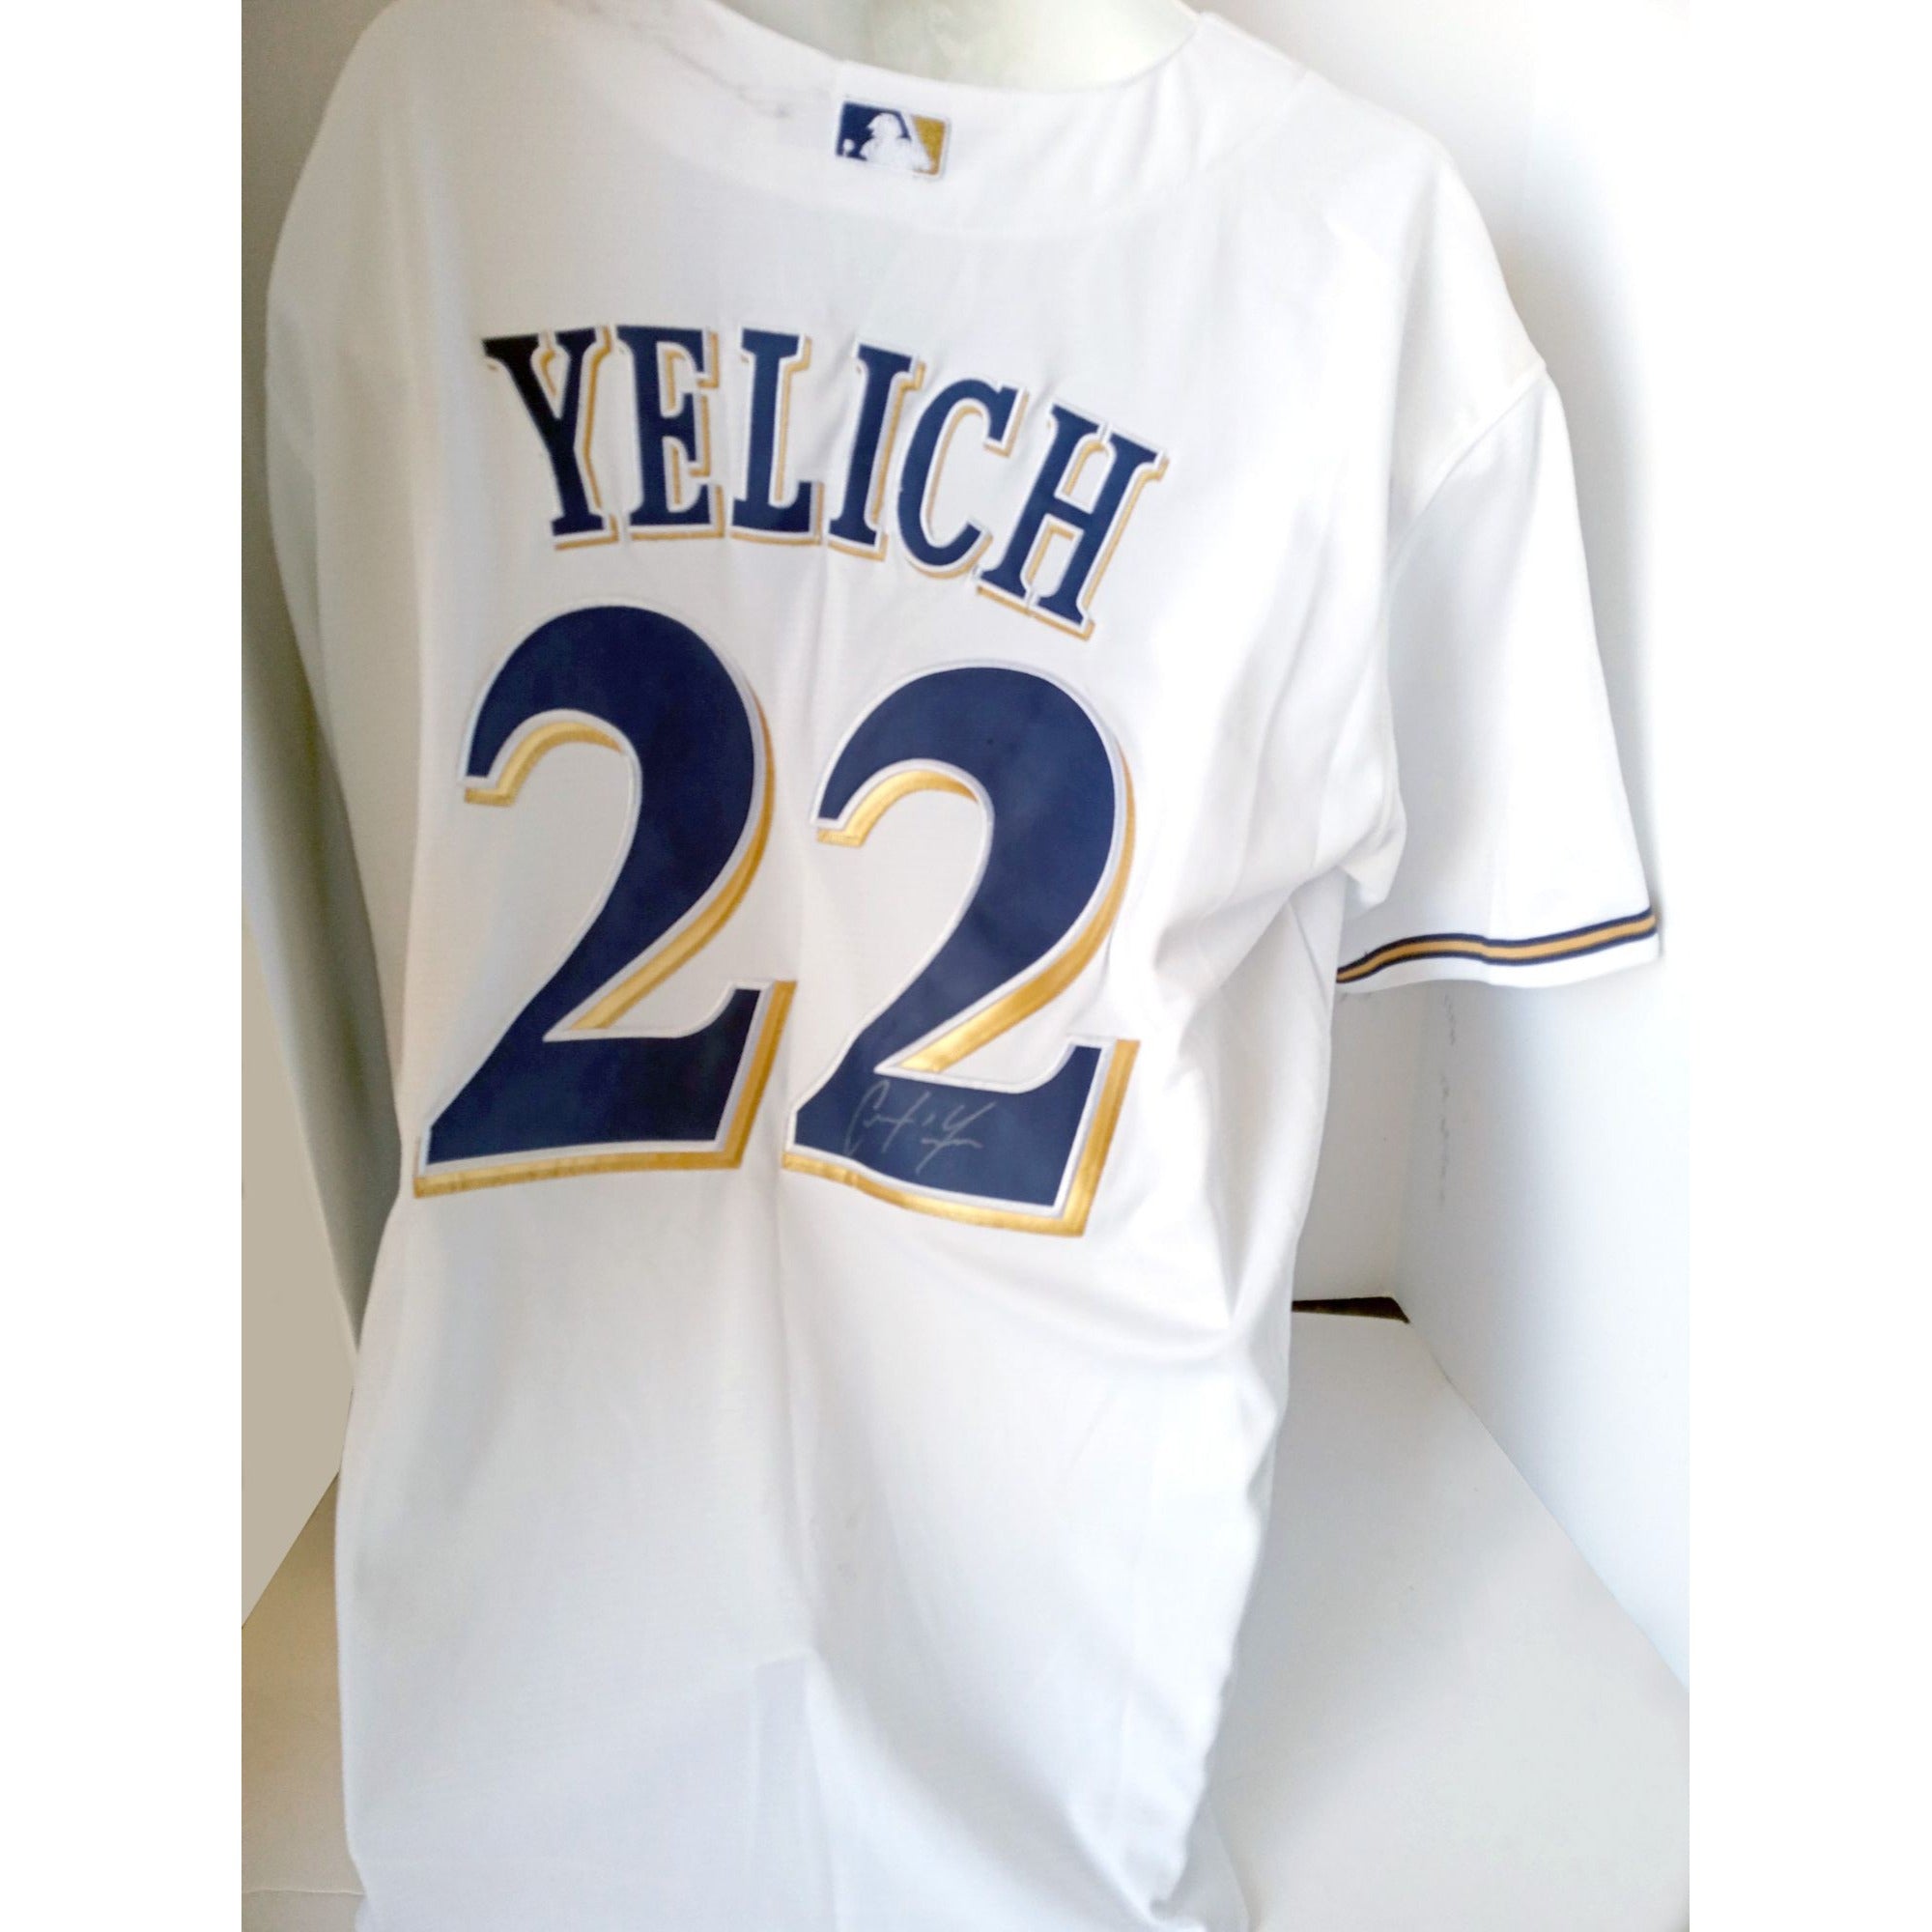 Christian Yelich Autographed Authentic Brewers Jersey